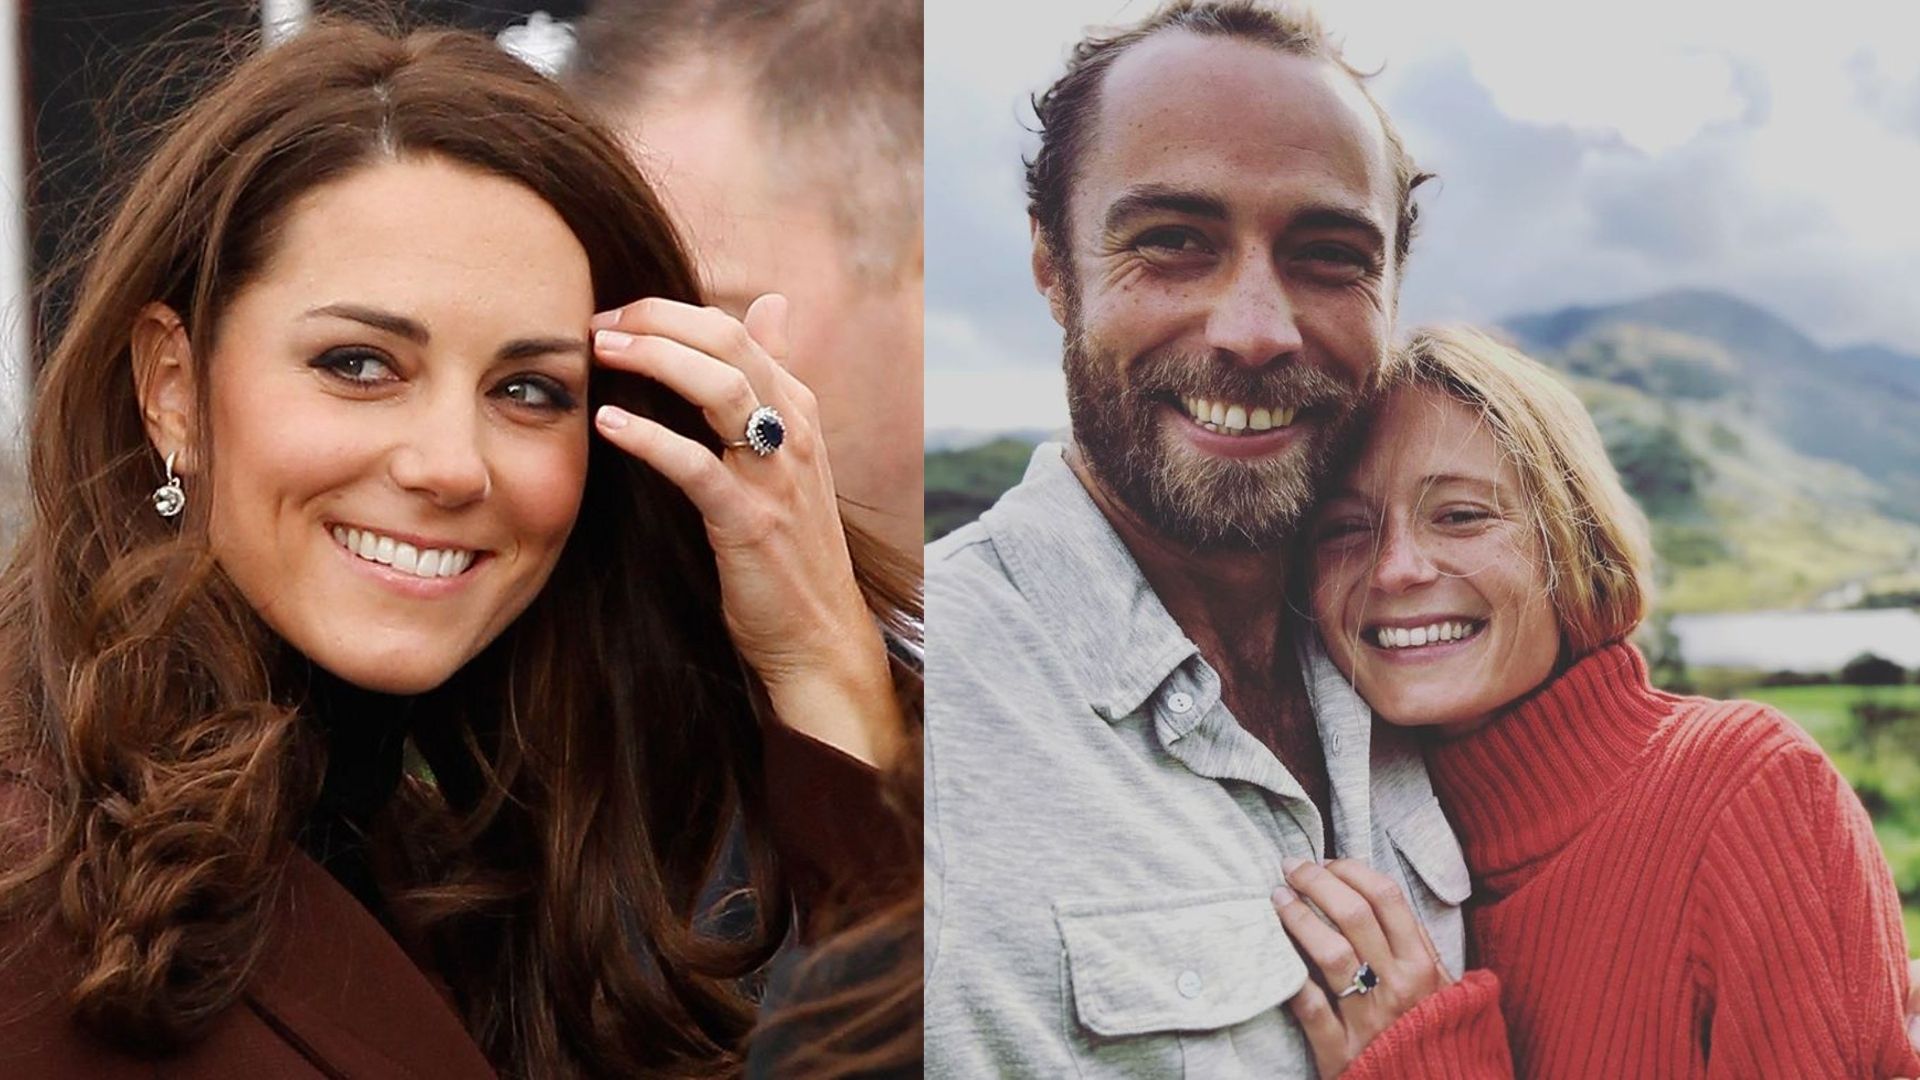 James Middleton S Engagement Ring Choice Seems To Be Inspired By Kate Middleton Harper S Bazaar Arabia